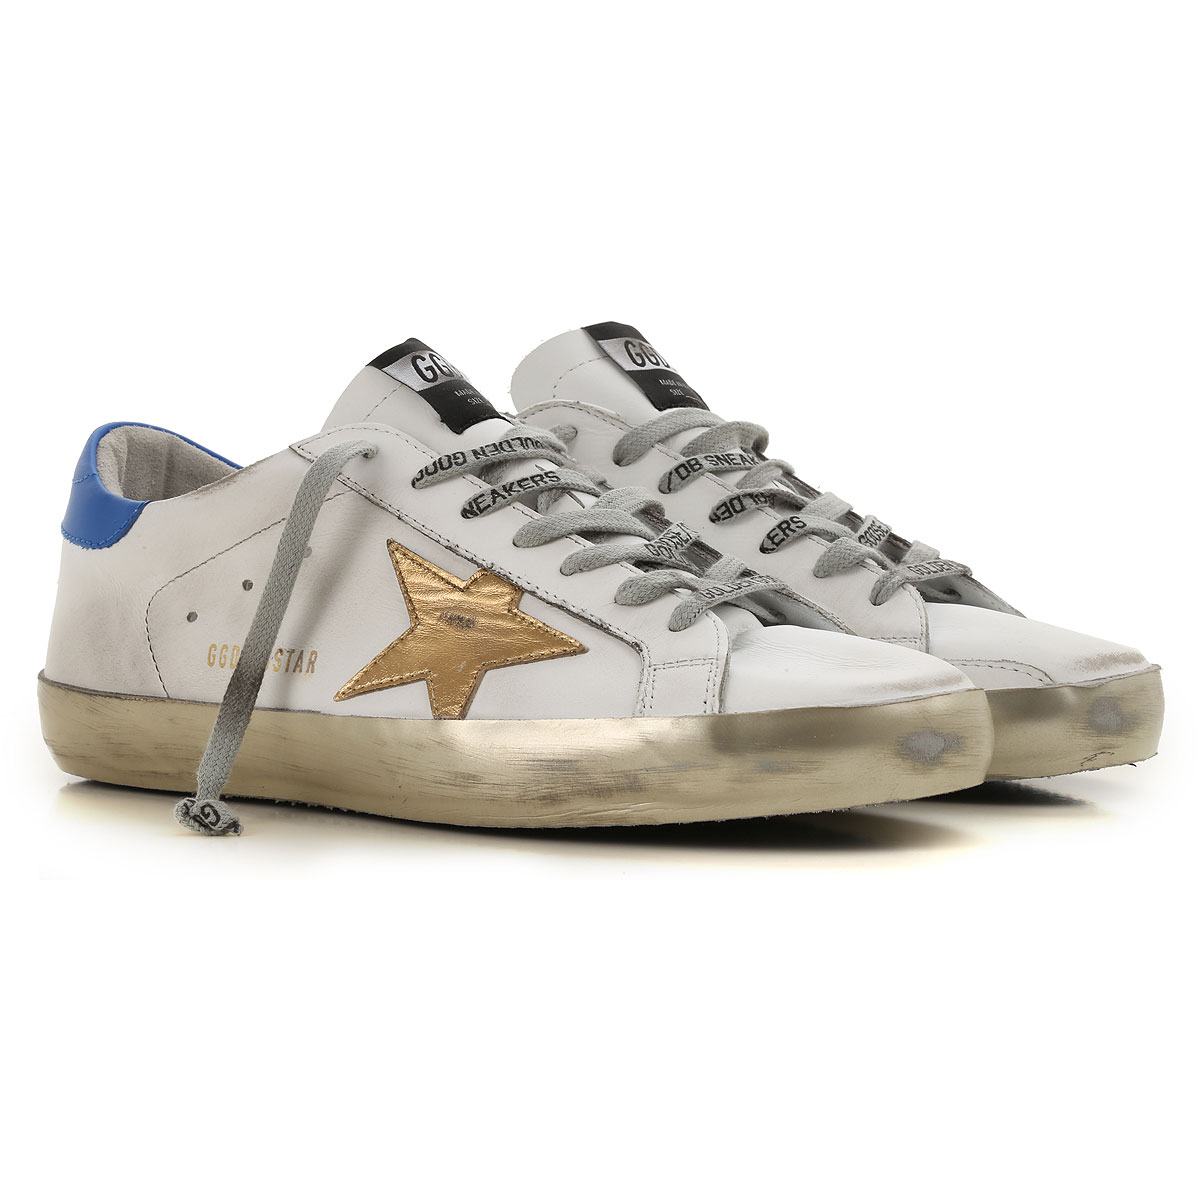 Mens Shoes Golden Goose, Style code: g3ms590-n24-